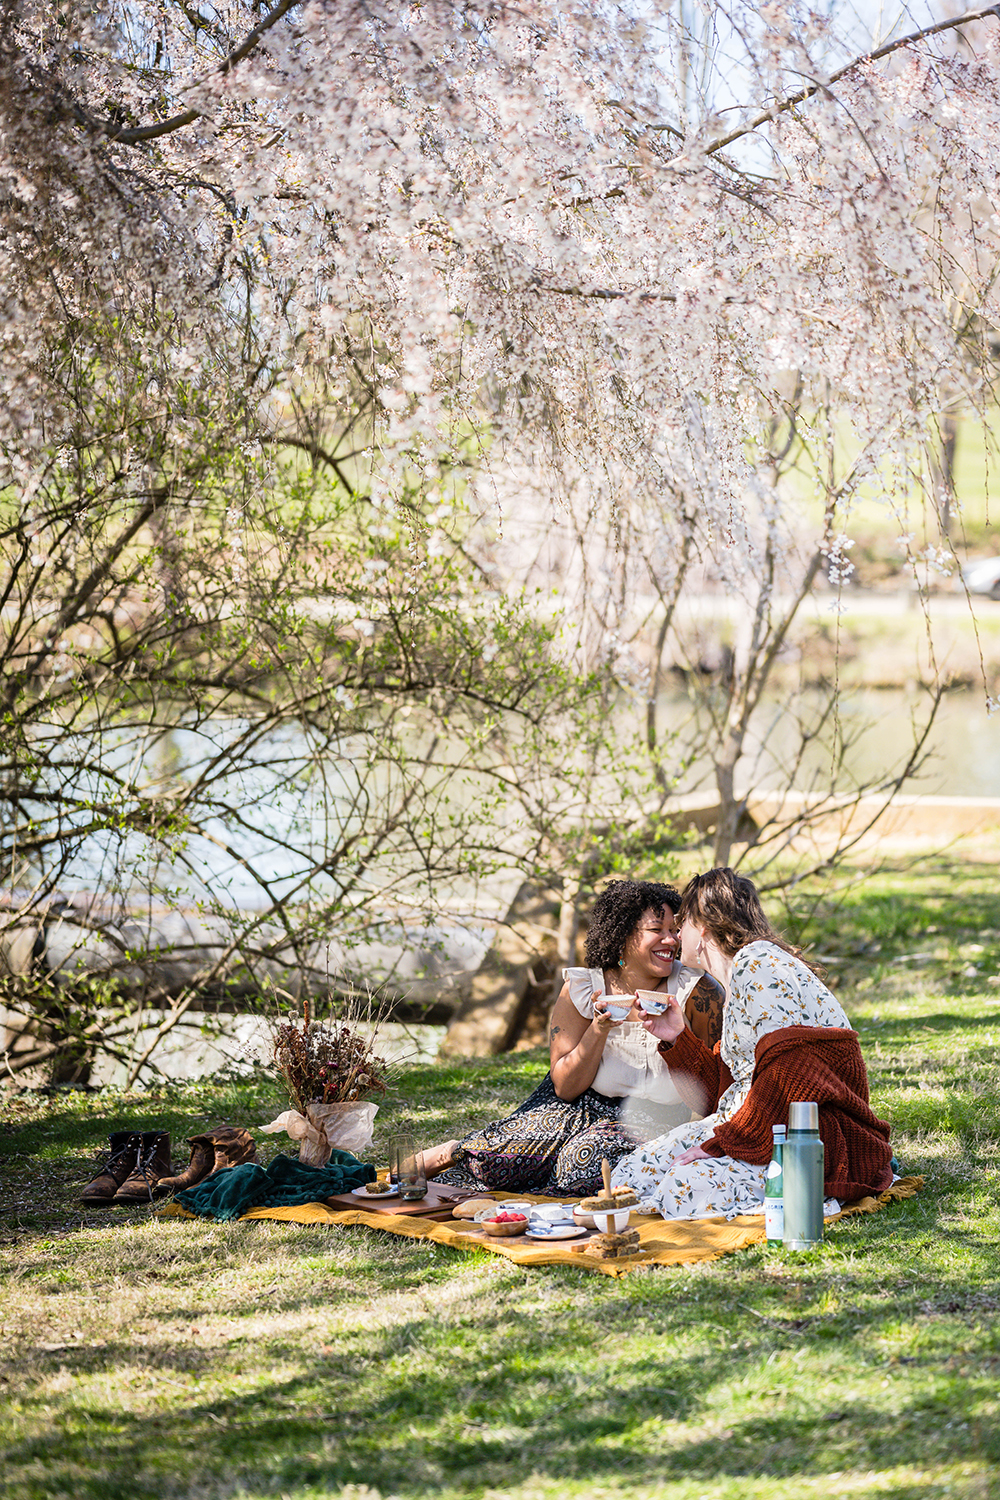 An LGBTQ+ couple snuggle up to one another during their picnic and rub noses as they clink their coffee mug under a shady tree at Duck Pond.